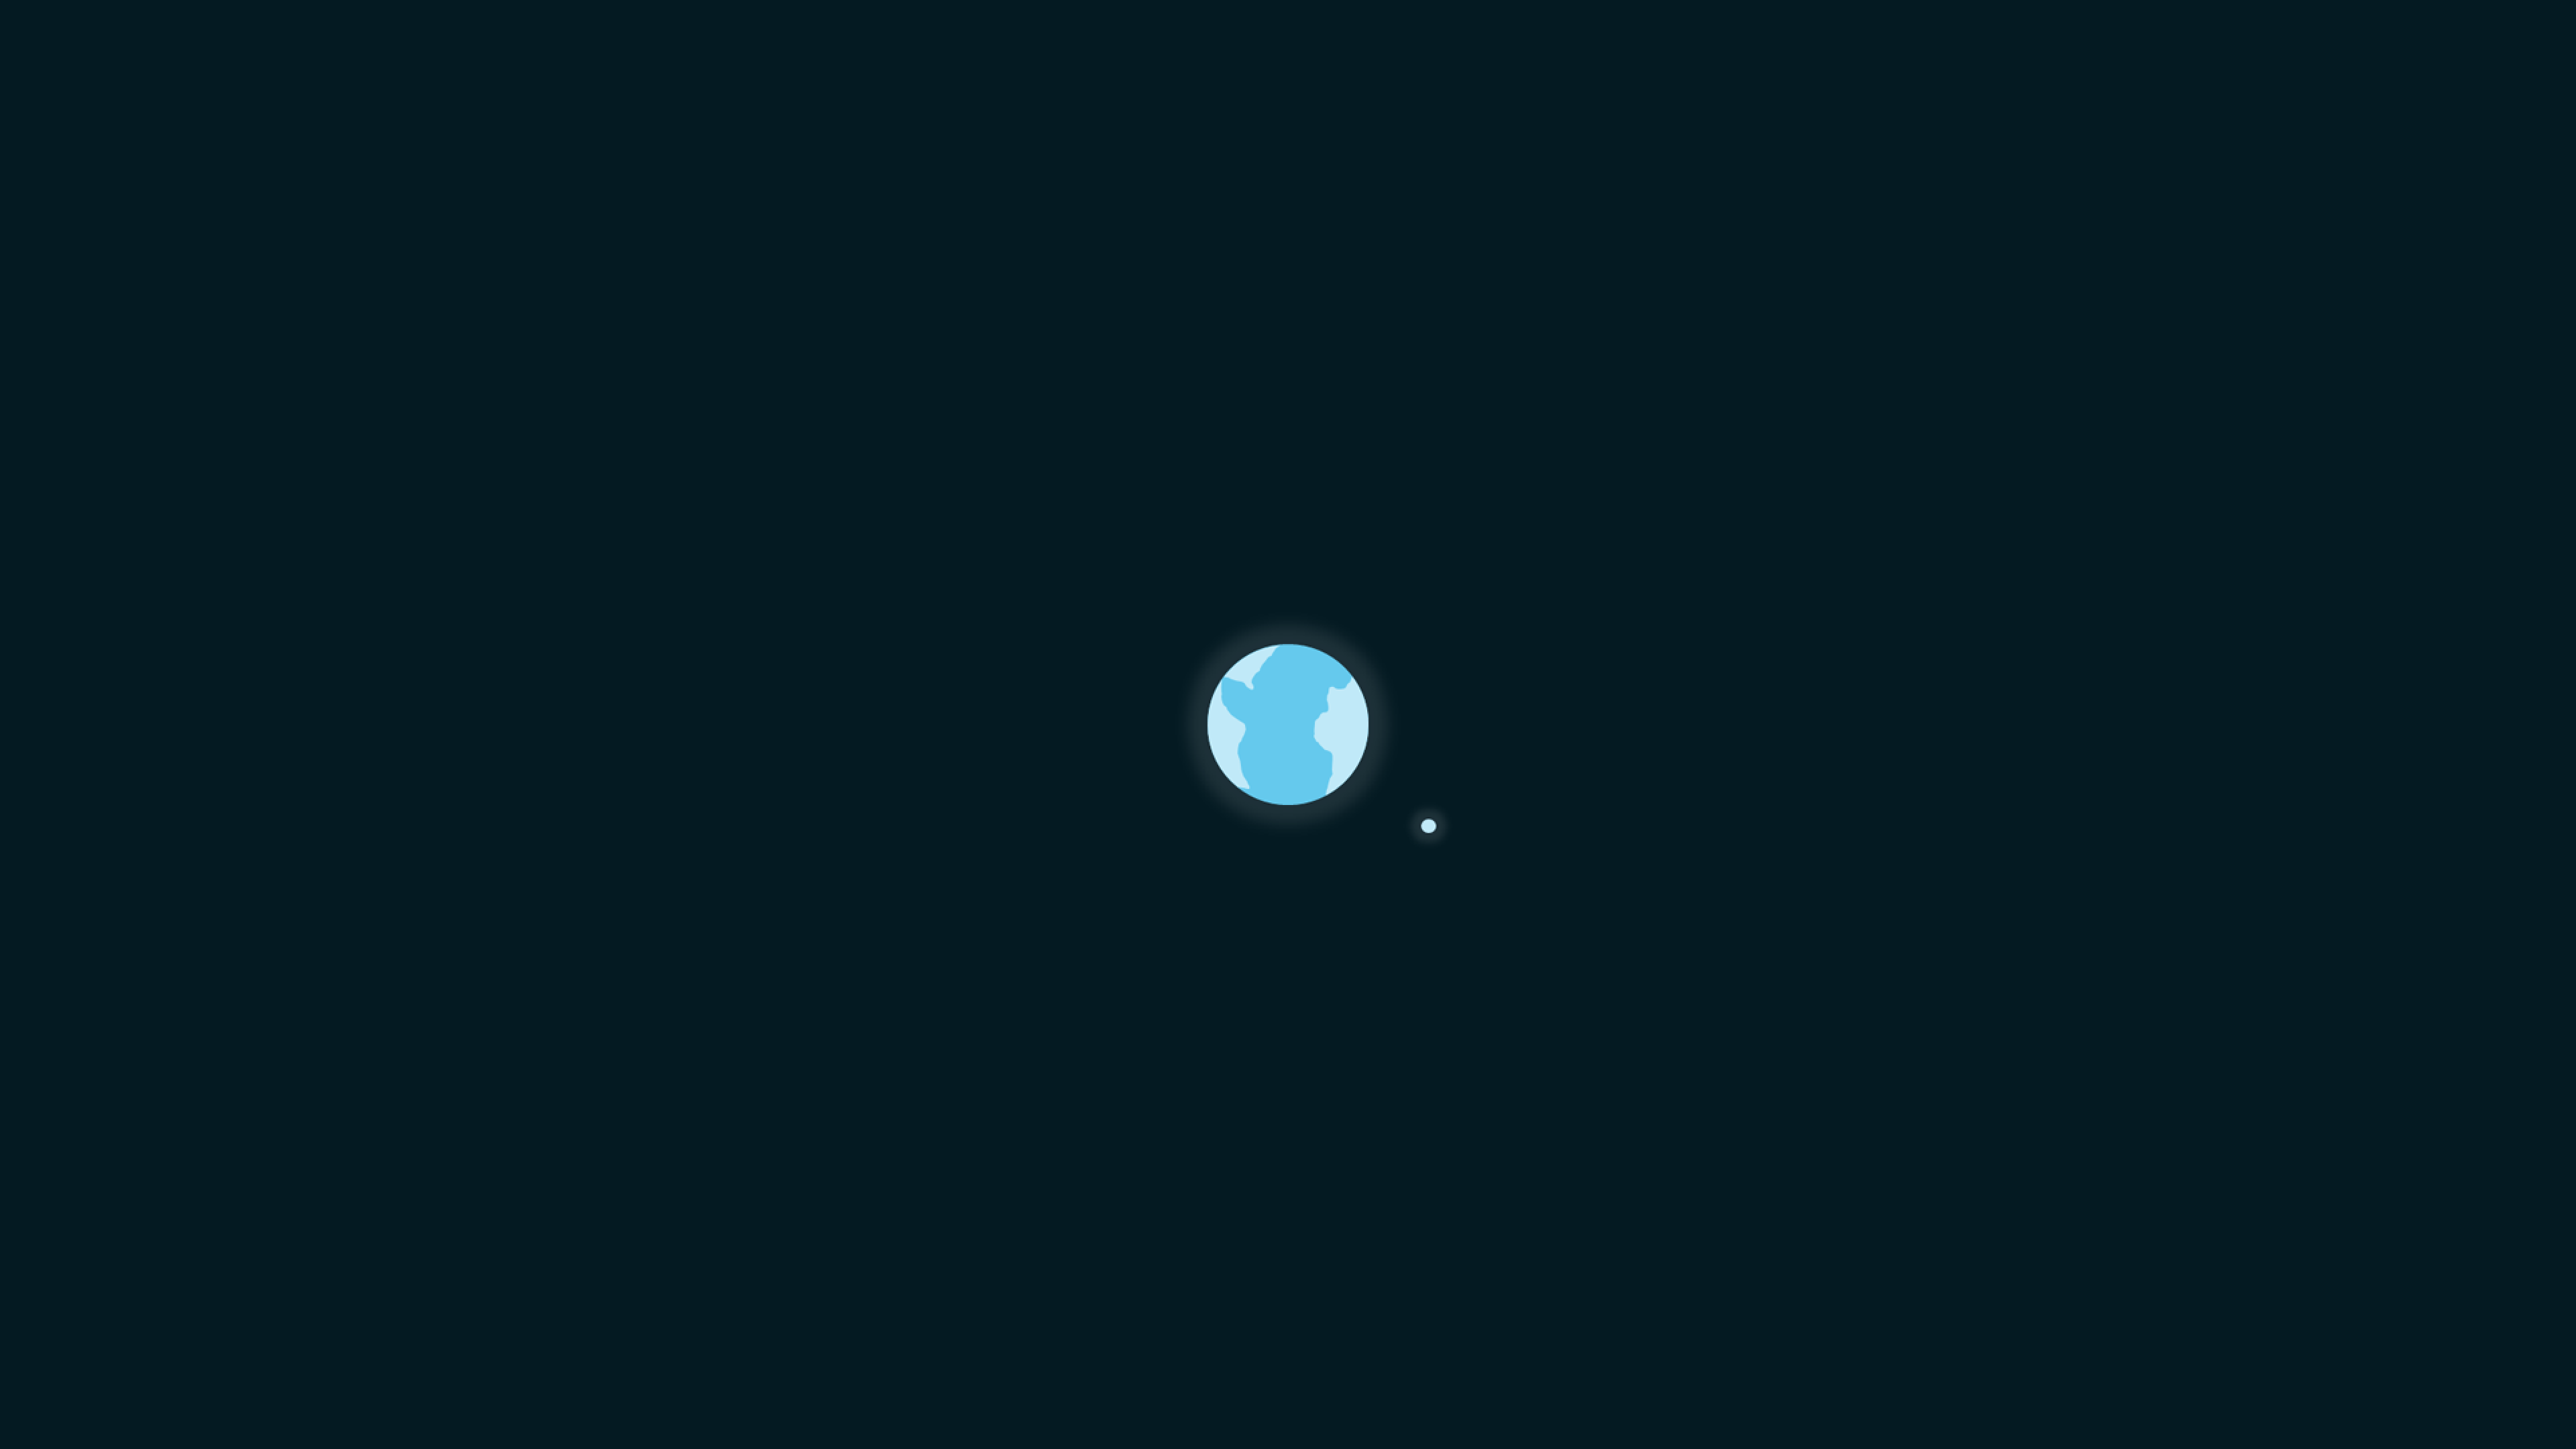 Earth with Moon against a black background